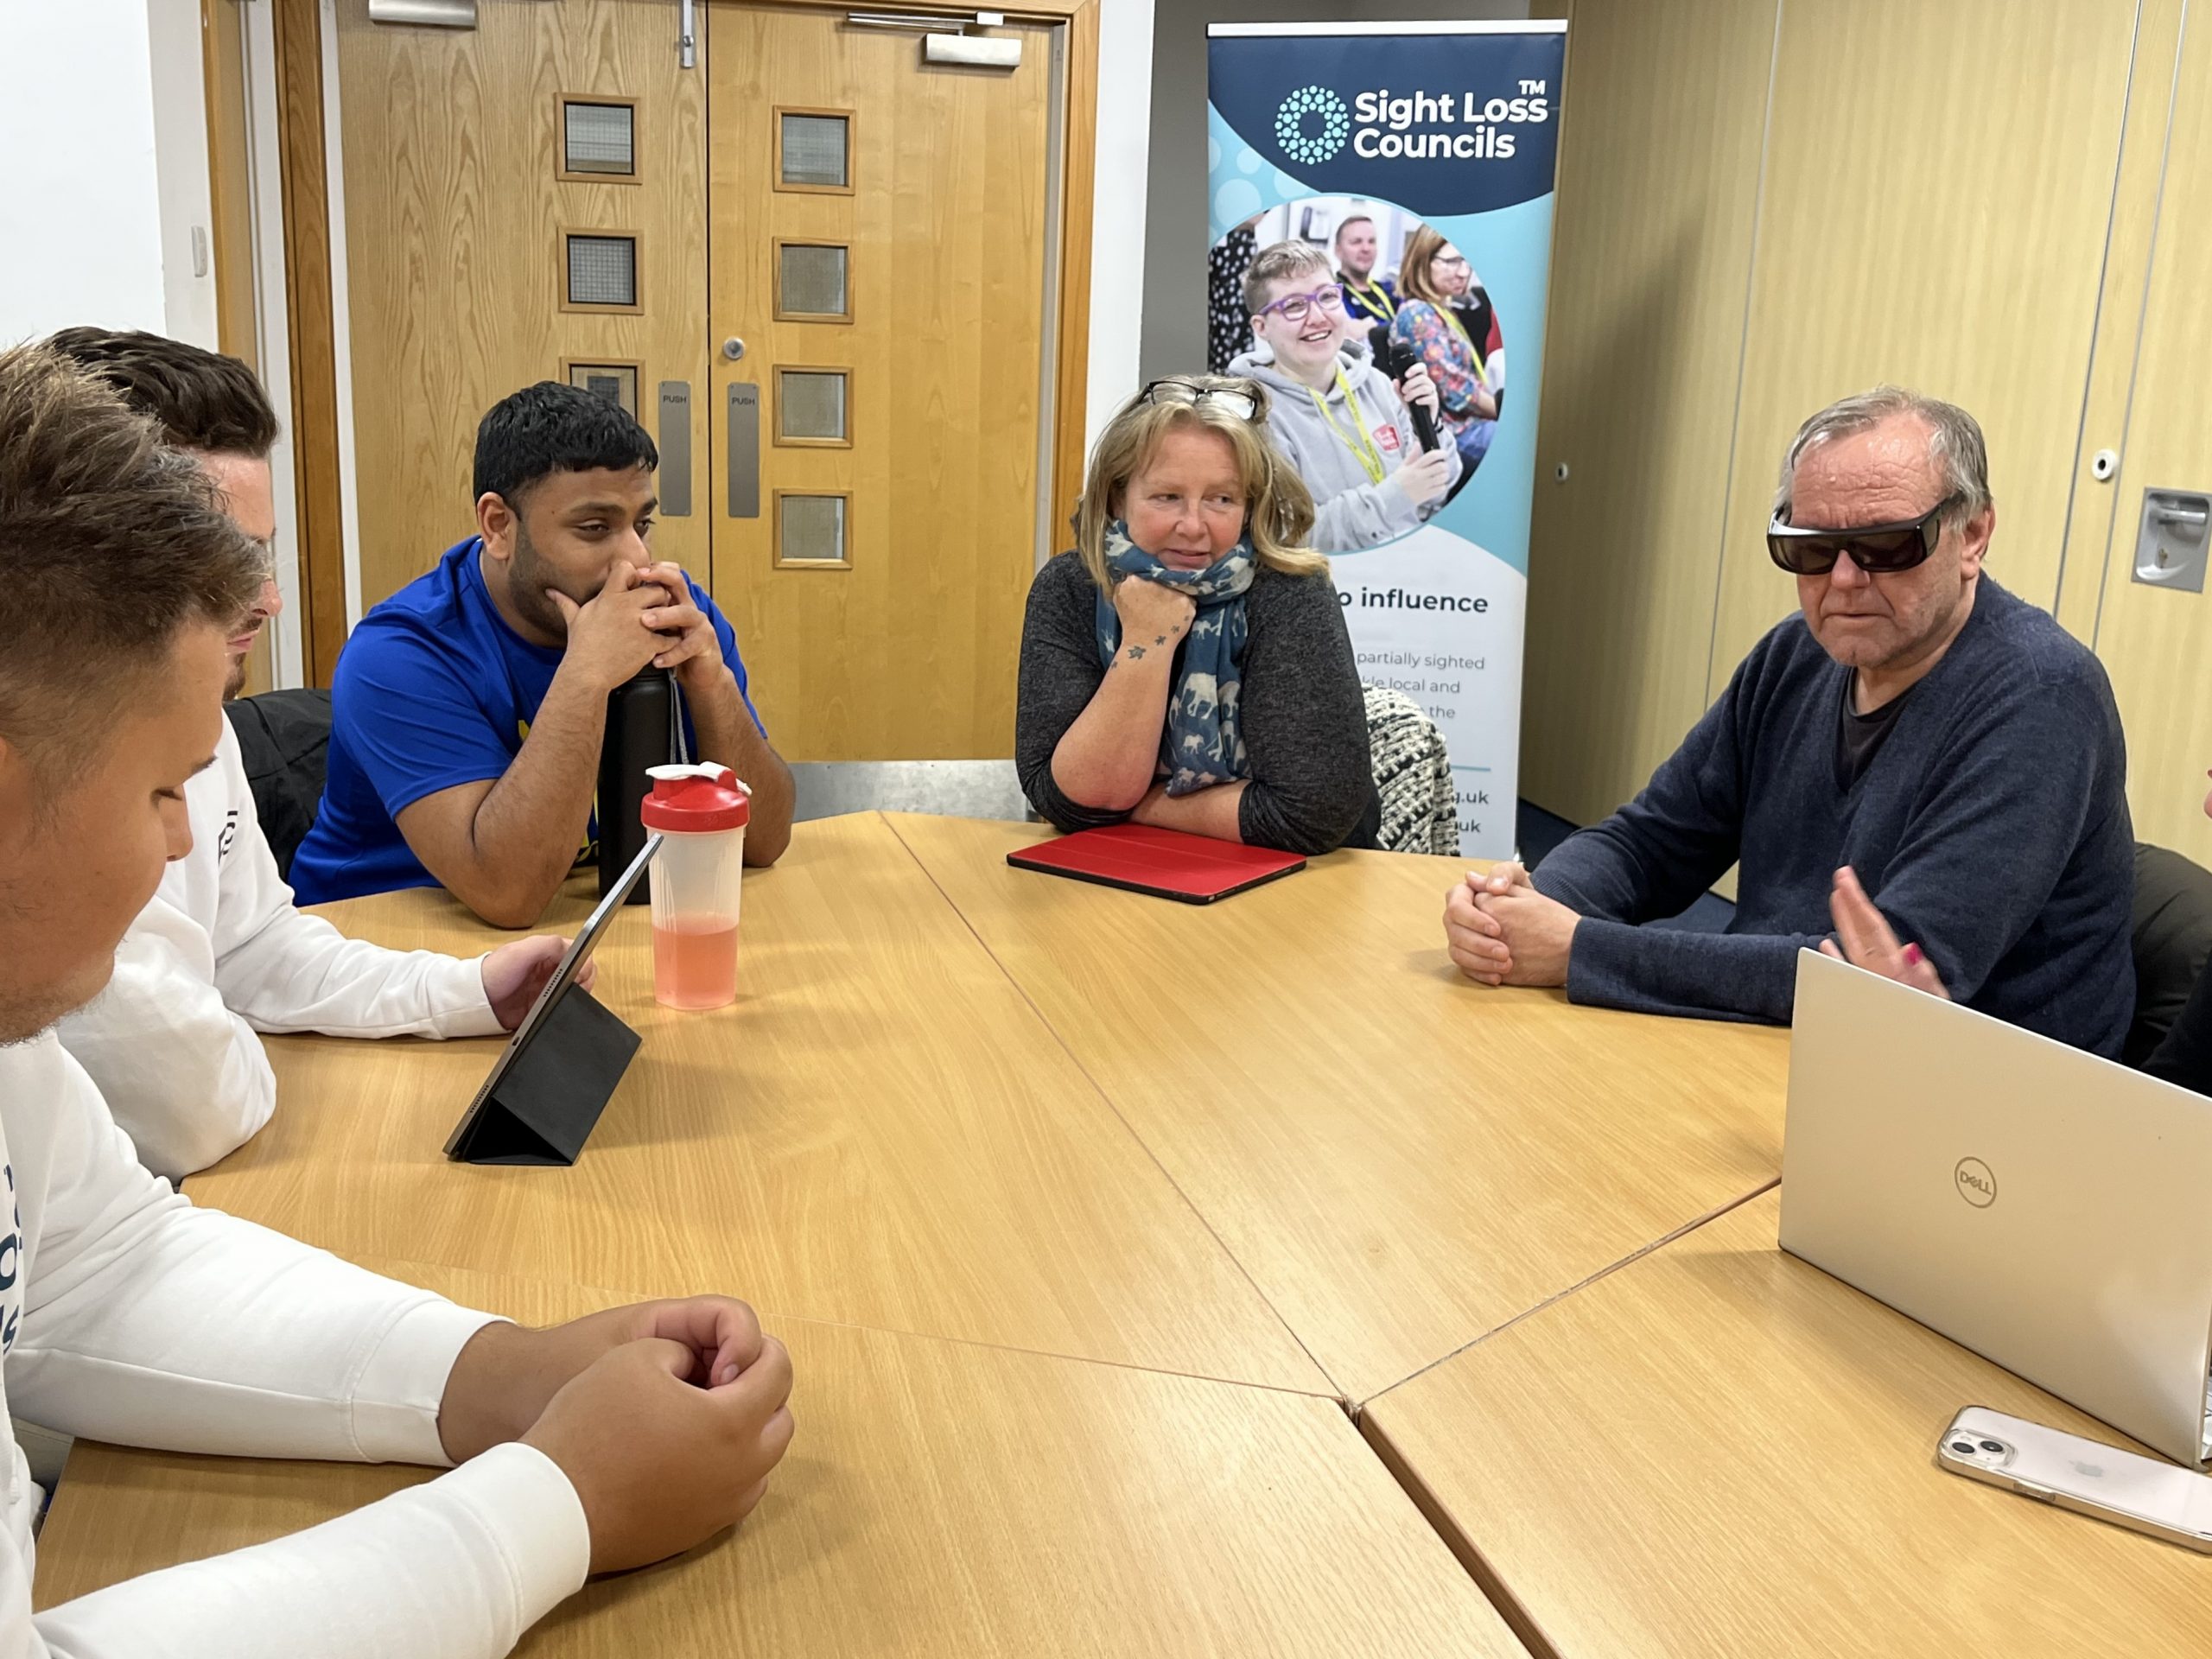 Lancashire SLC members talking during their launch meeting. From left to right: Lloyd, David, Mohammed Salim, Alison, and Michael.